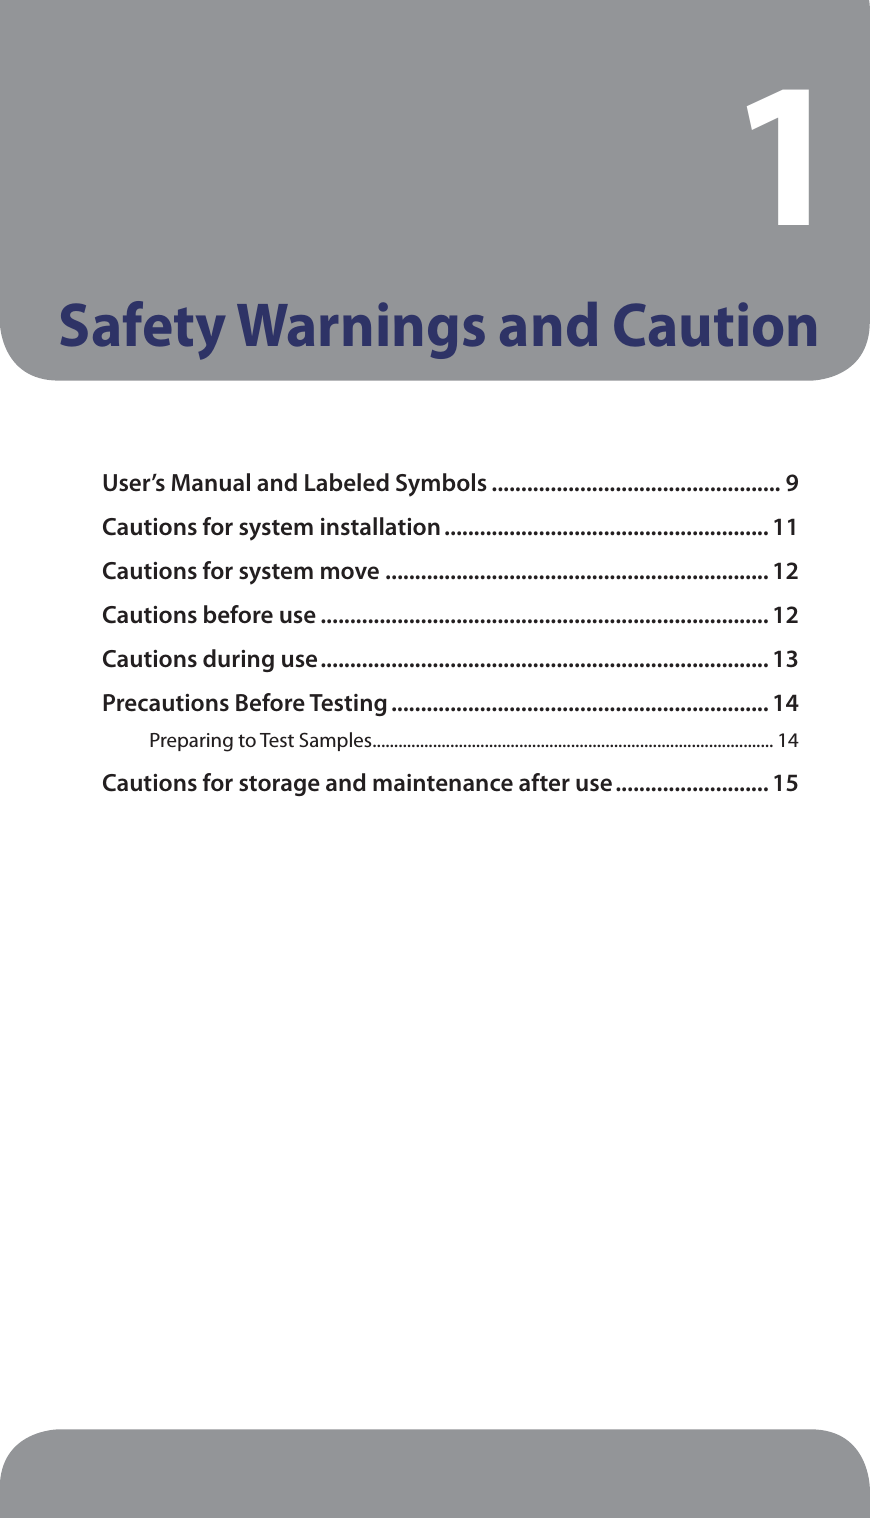 Safety Warnings and Caution1User’s Manual and Labeled Symbols ................................................. 9Cautions for system installation ....................................................... 11Cautions for system move ................................................................. 12Cautions before use ............................................................................ 12Cautions during use ............................................................................ 13Precautions Before Testing ................................................................ 14Preparing to Test Samples ............................................................................................. 14Cautions for storage and maintenance after use .......................... 15